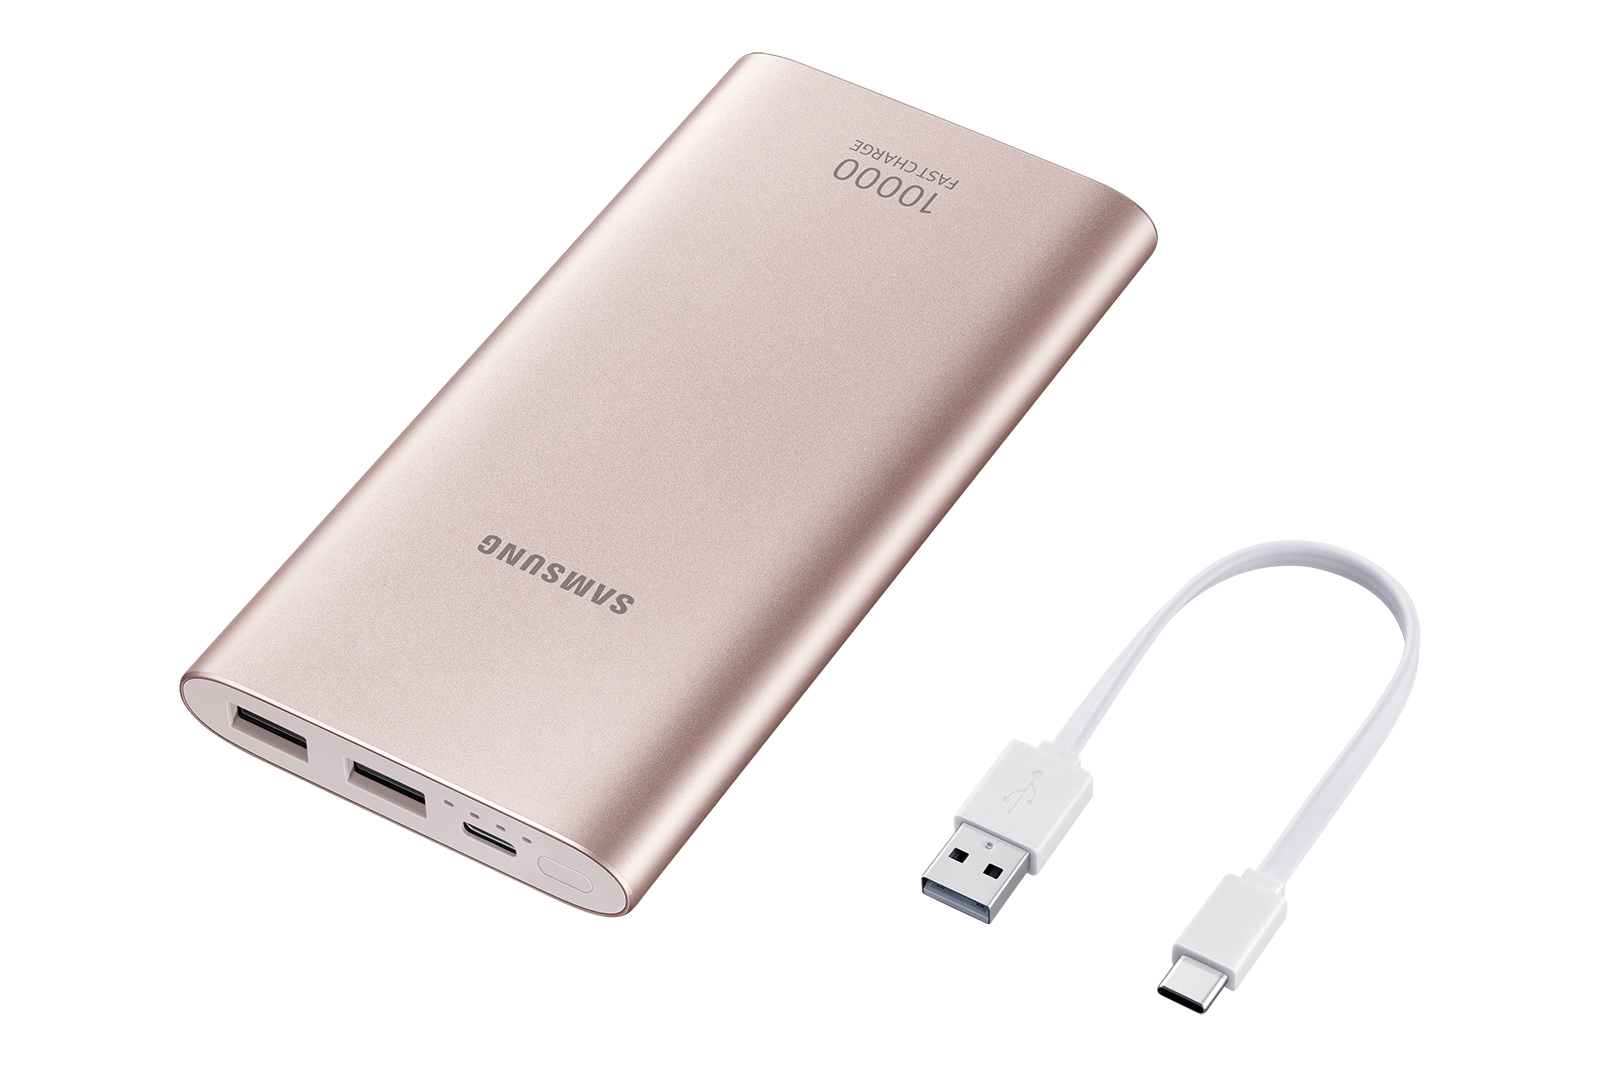 Samsung Portable Charger Only.